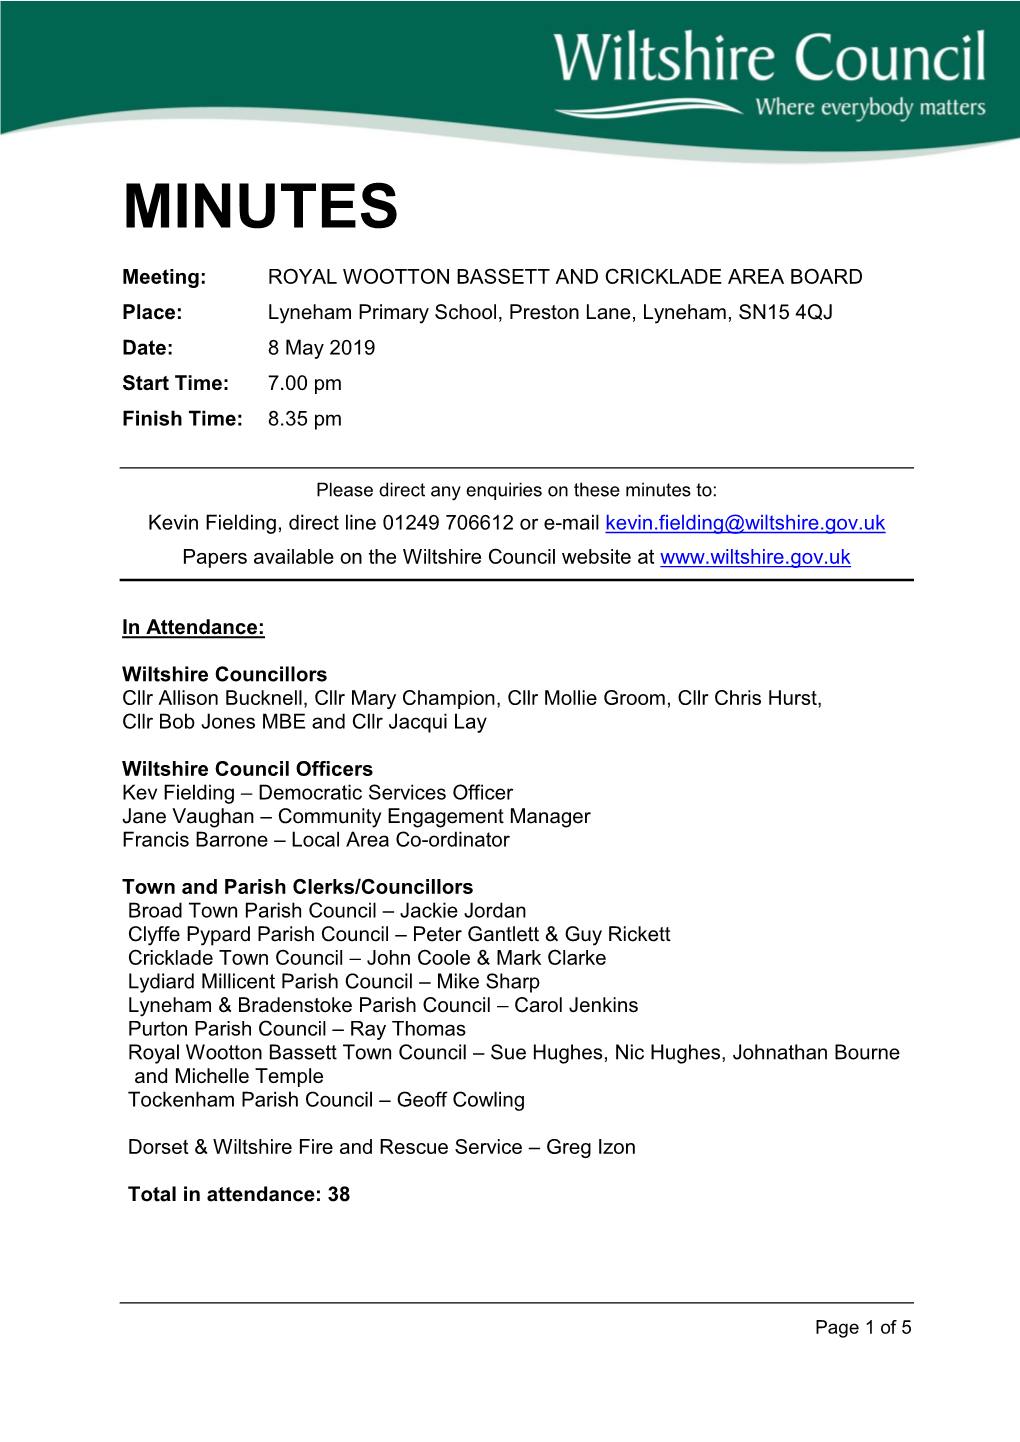 (Public Pack)Minutes Document for Royal Wootton Bassett and Cricklade Area Board, 08/05/2019 18:00